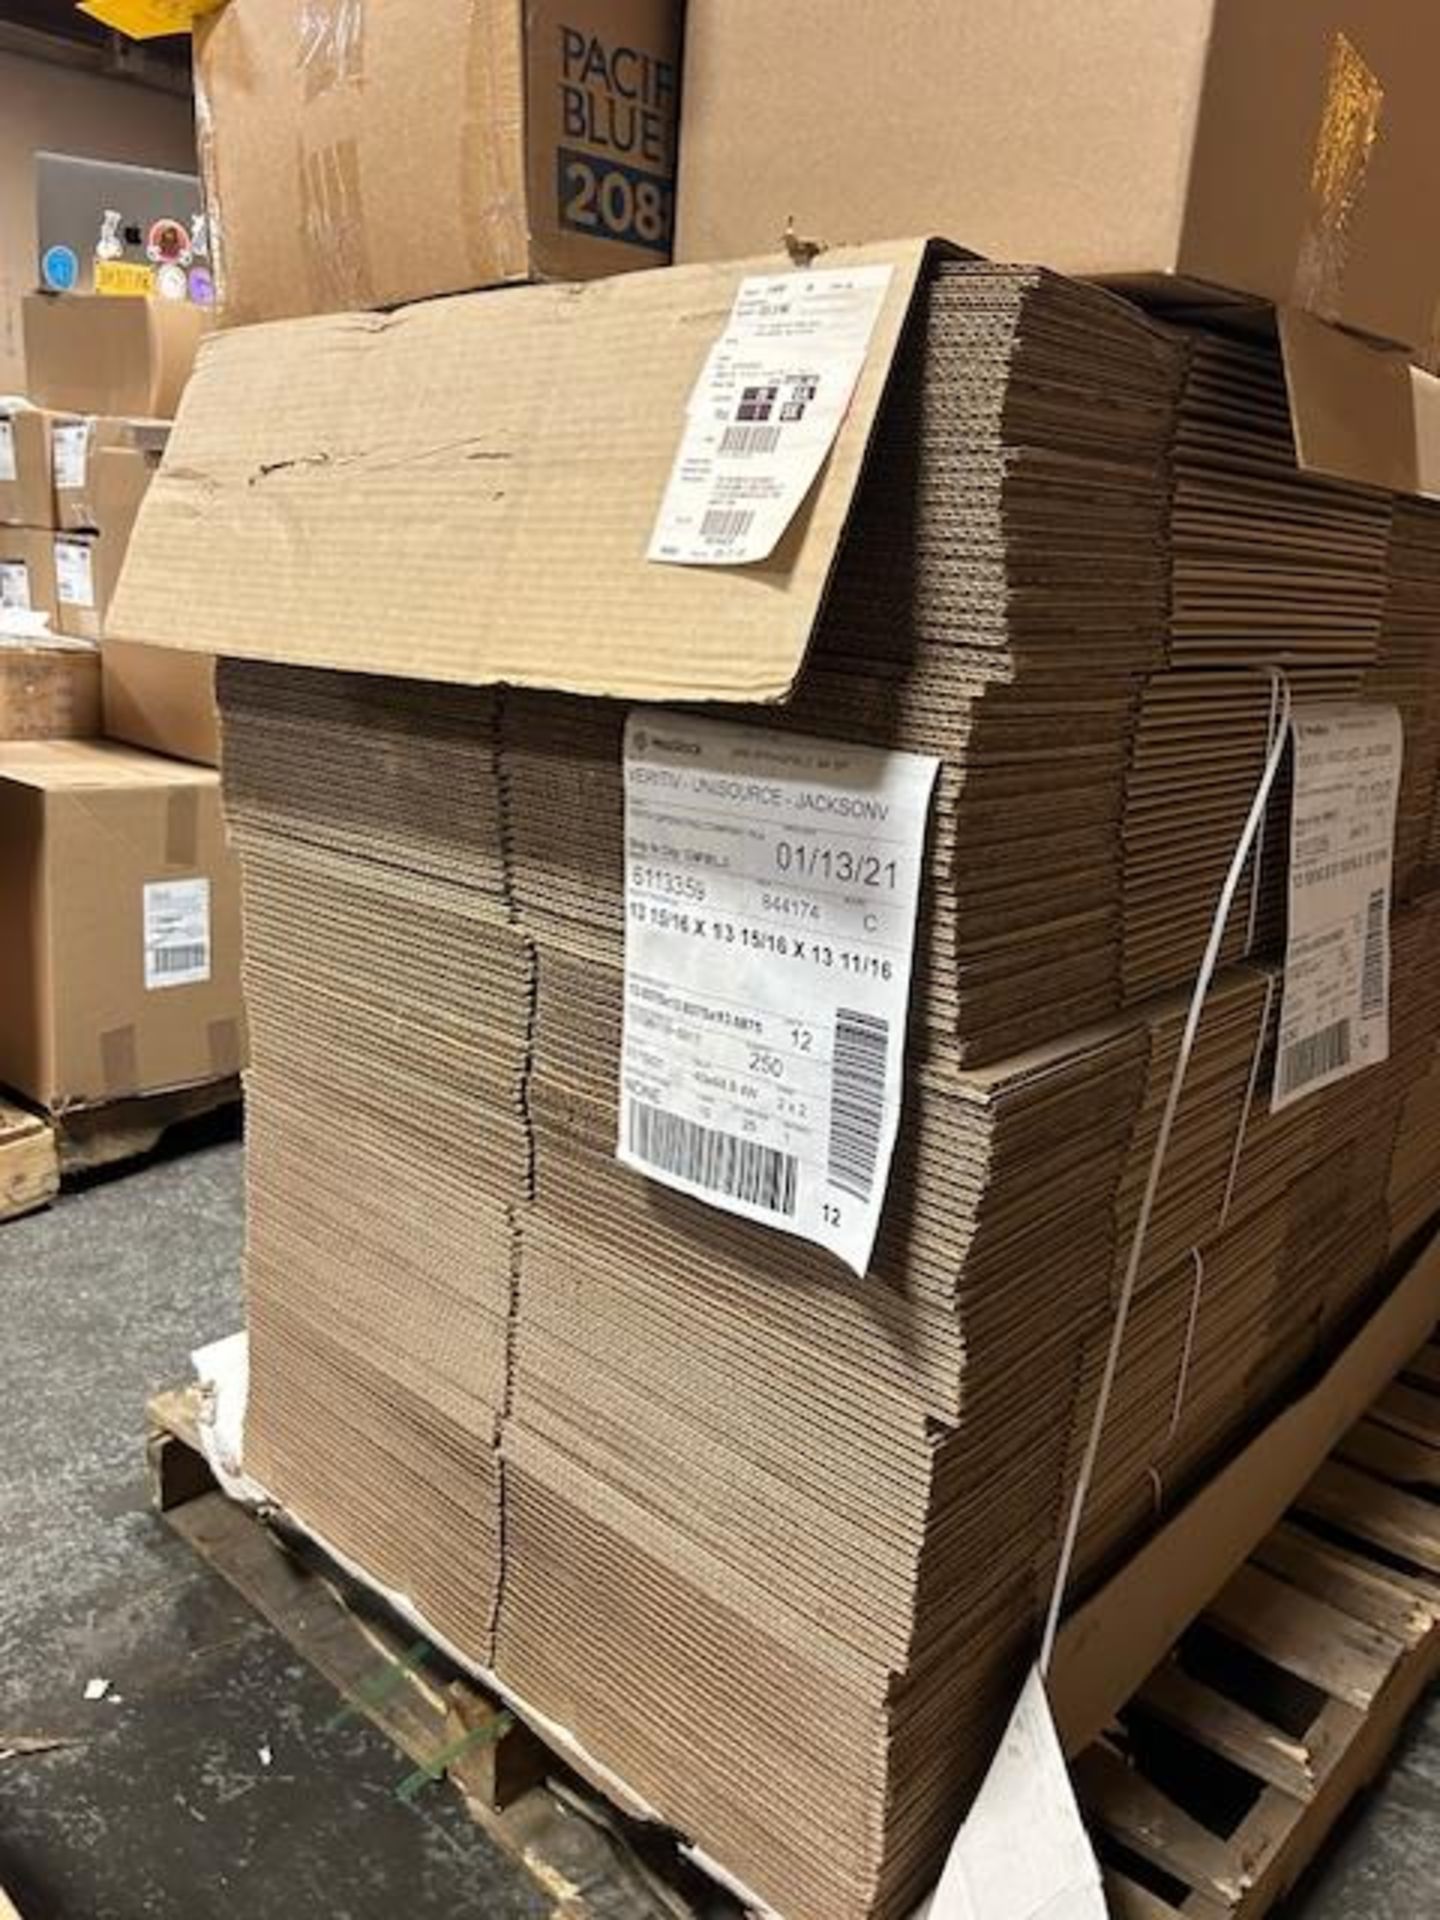 LOT - (250) 13-15/16 x 13-15/16 x 13-11/16 Brown Corrugated Boxes - Image 2 of 2